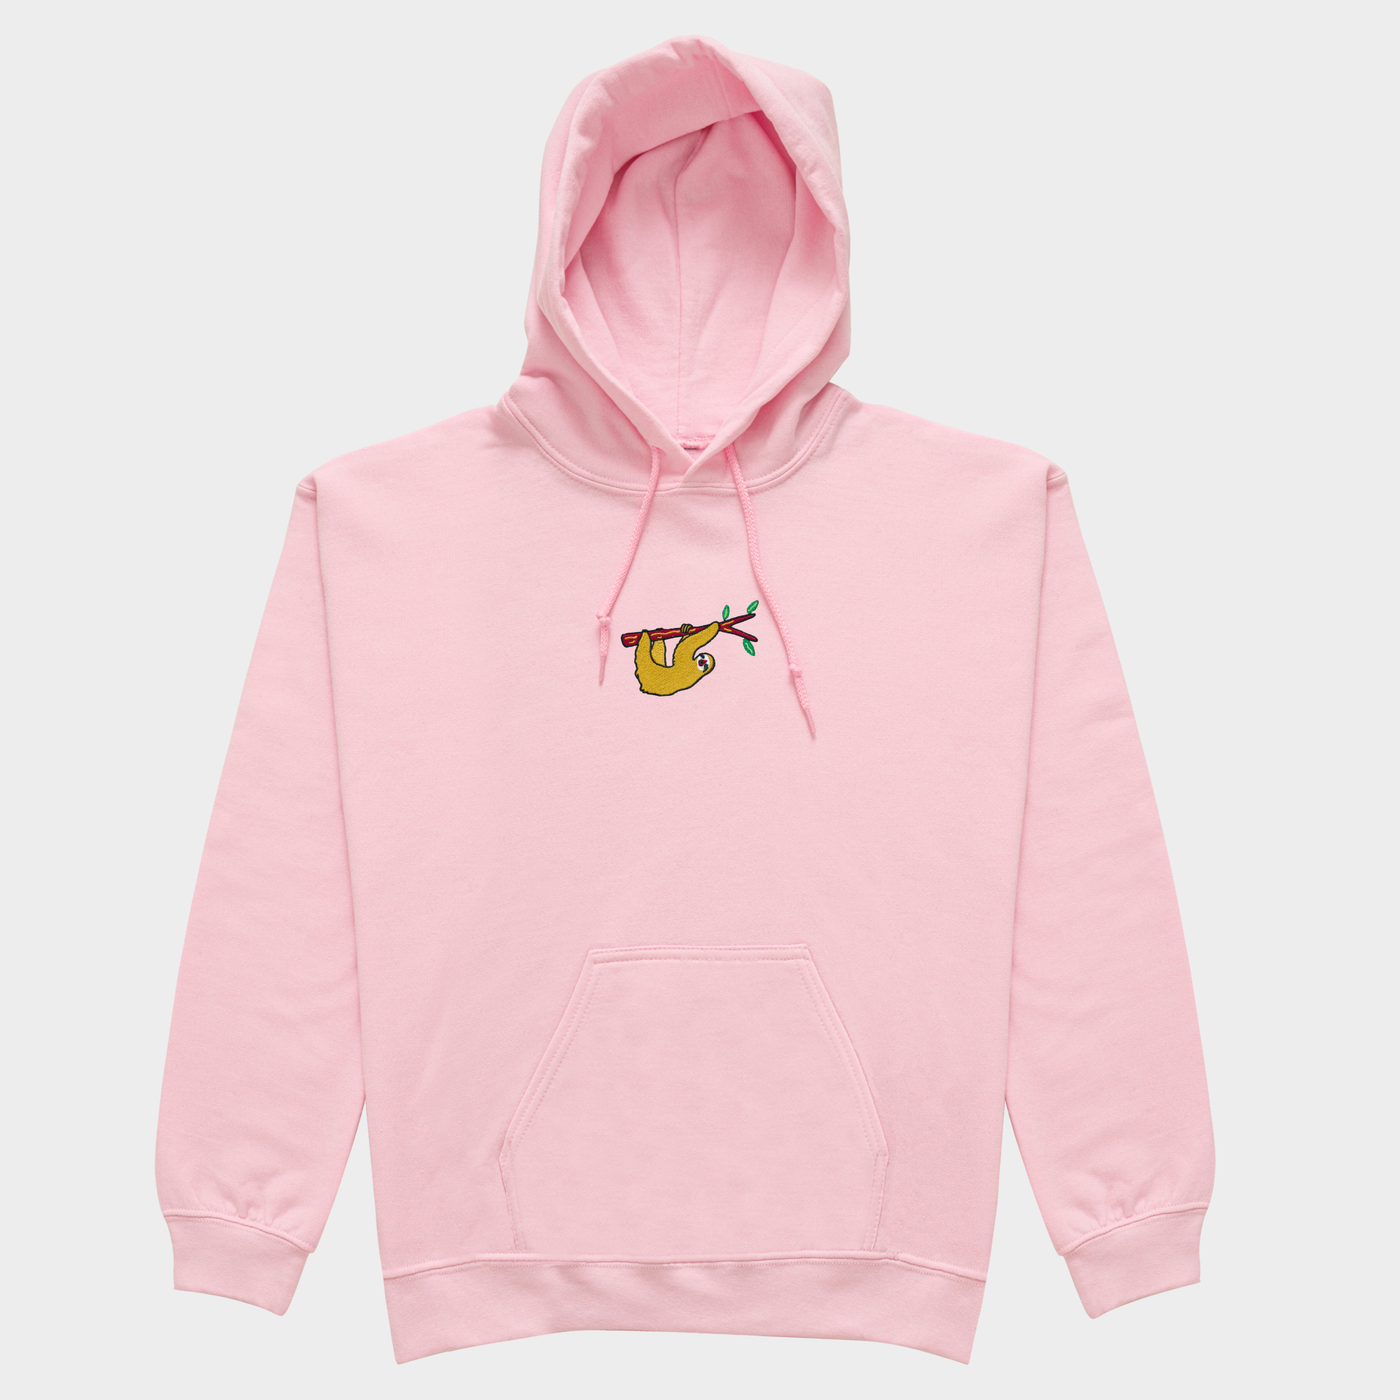 Bobby's Planet Women's Embroidered Sloth Hoodie from South American Amazon Animals Collection in Light Pink Color#color_light-pink